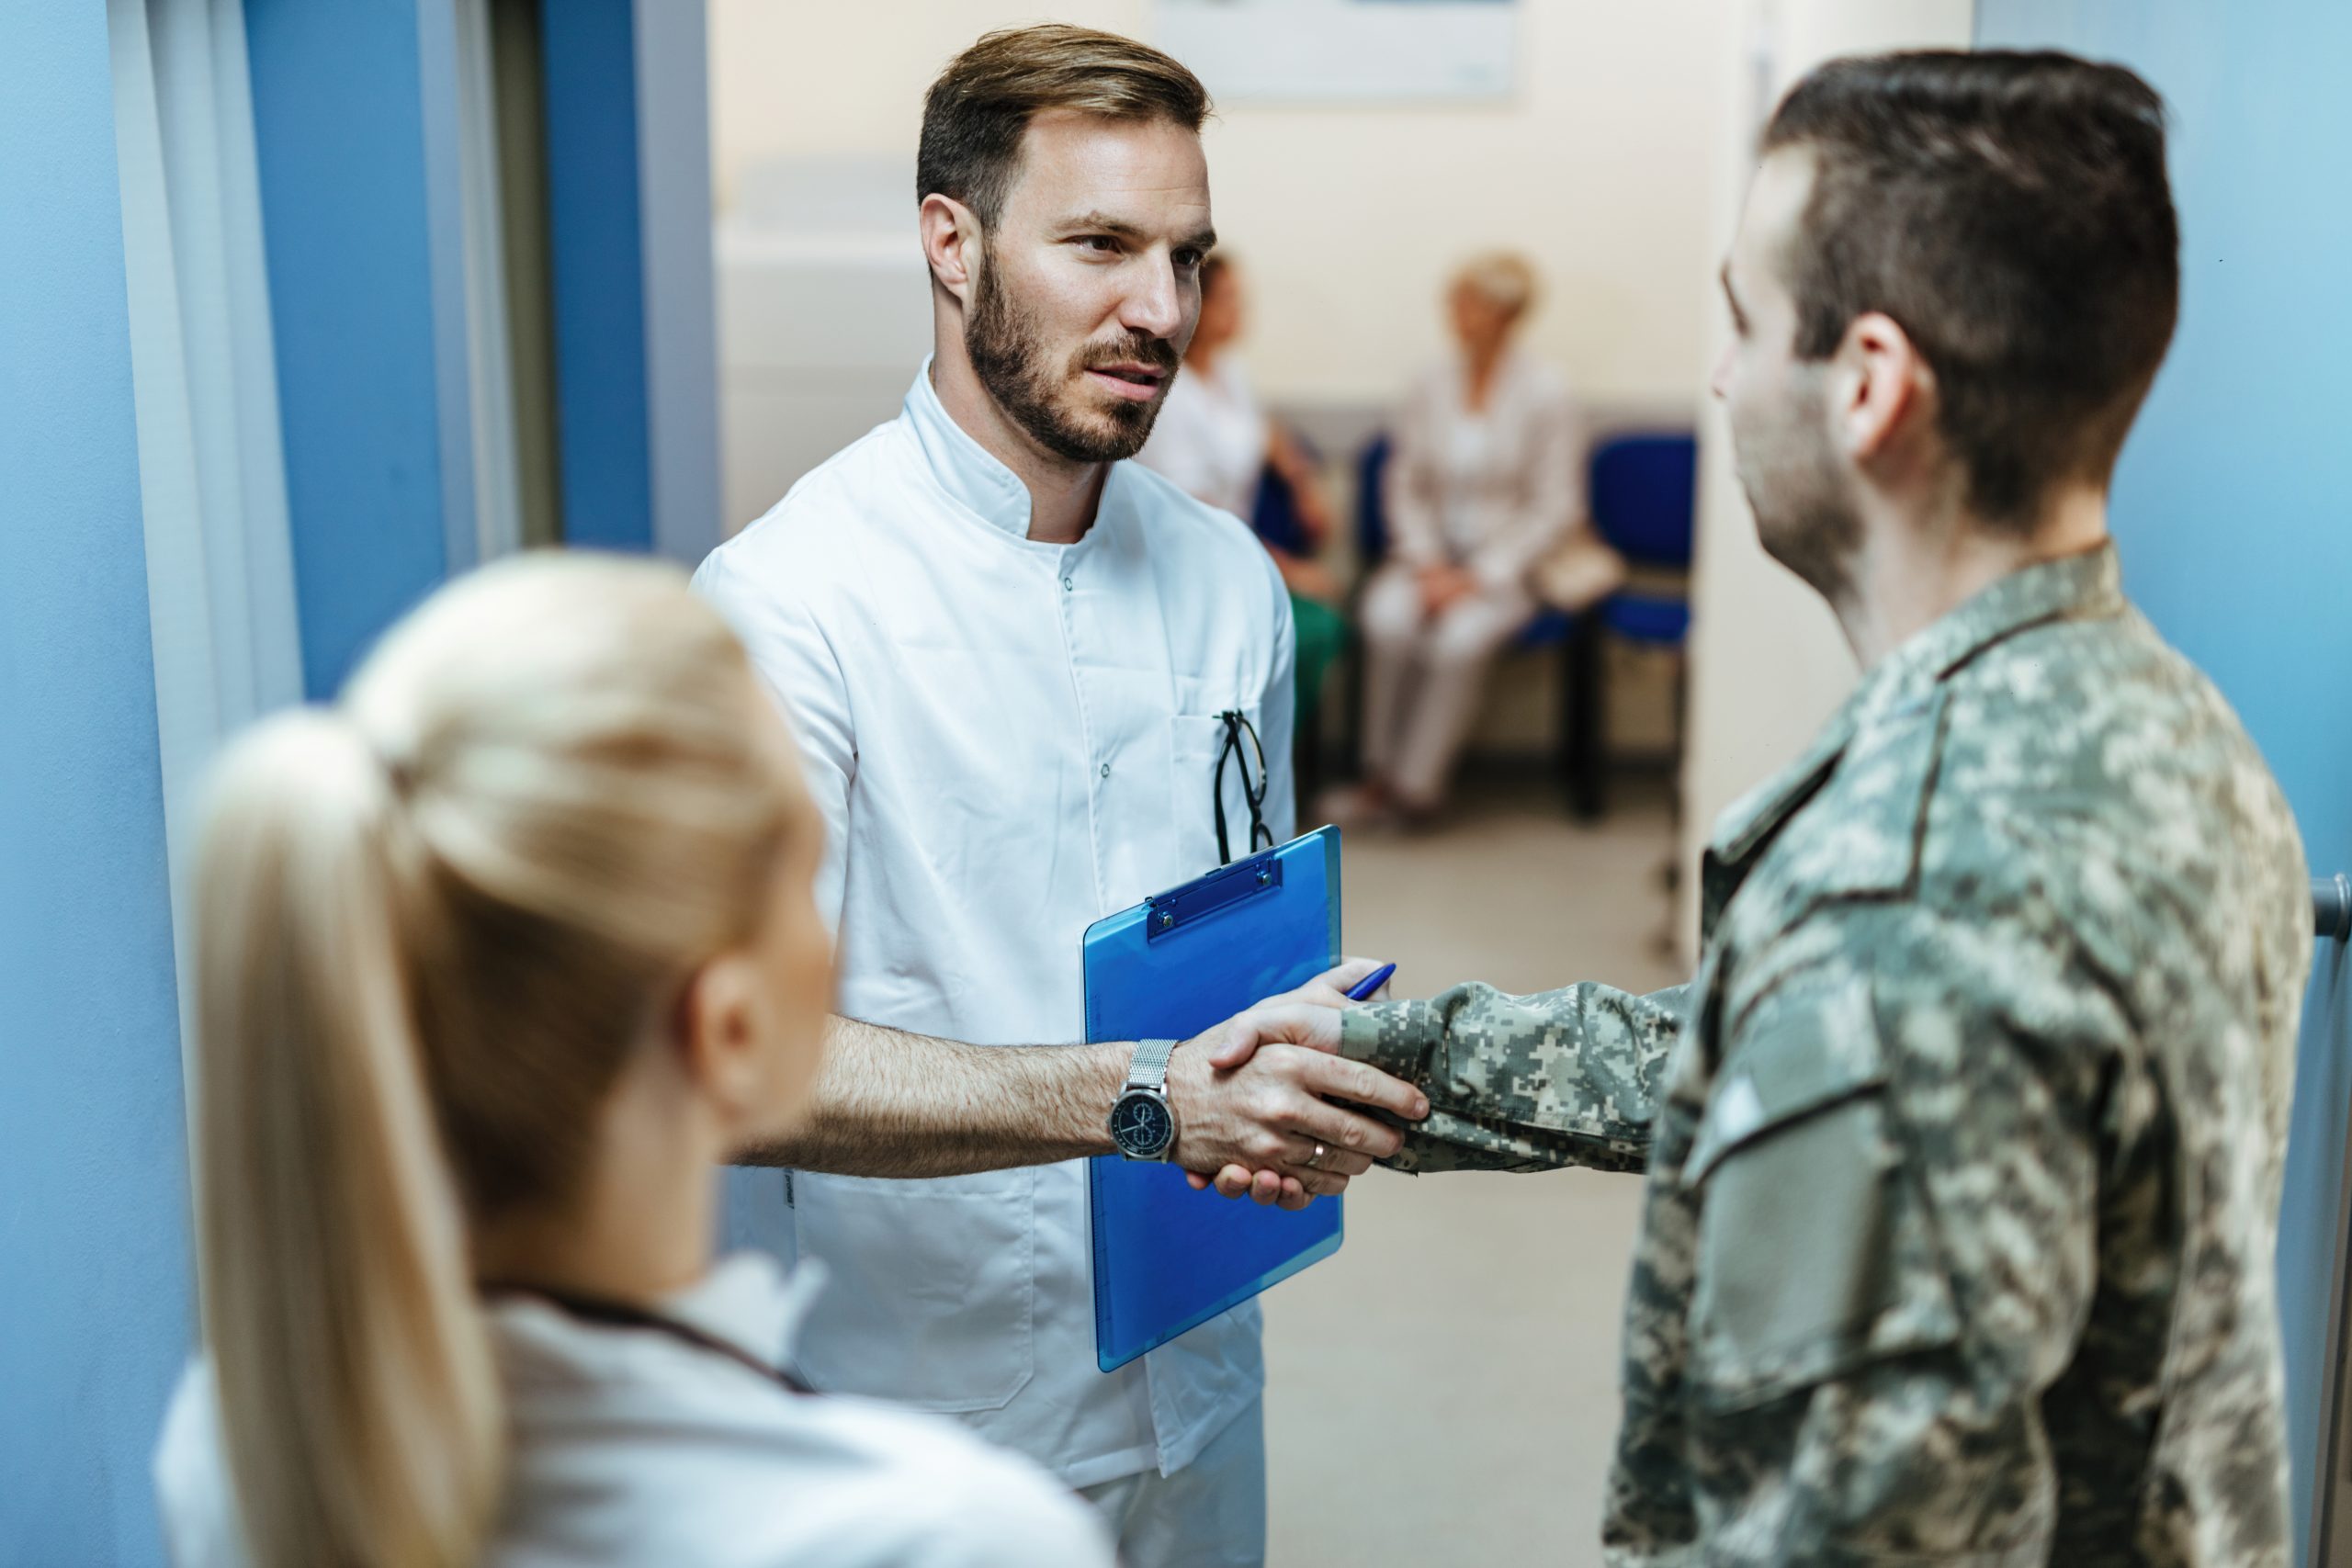 Two doctors talk with military man with one doctor shaking his hand.